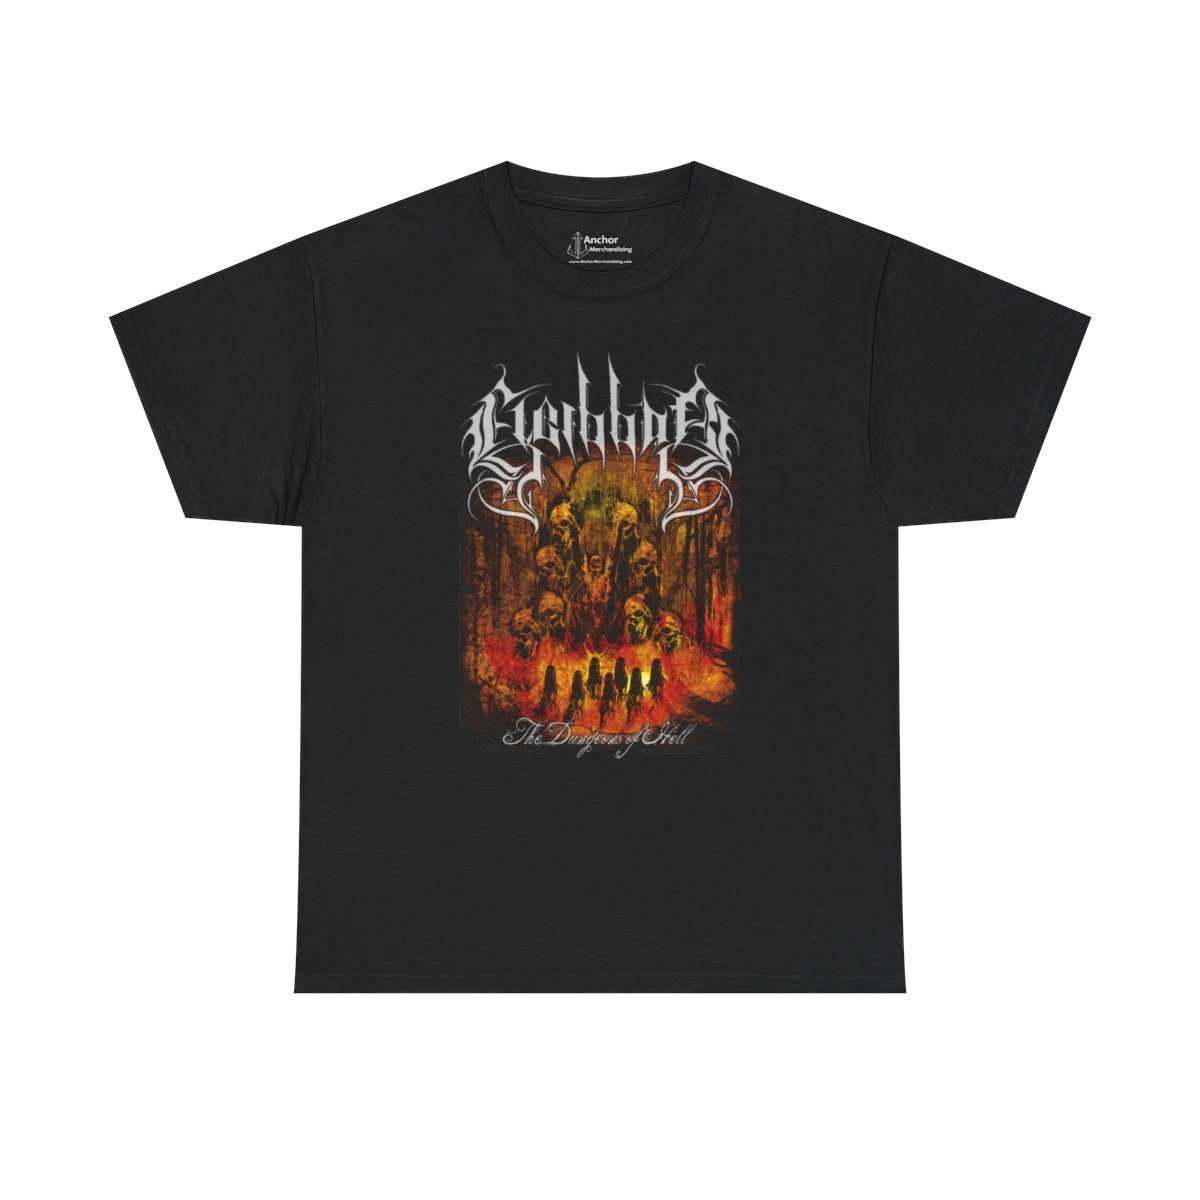 Elgibbor – The Dungeons Of Hell Short Sleeve Tshirt (2-Sided)